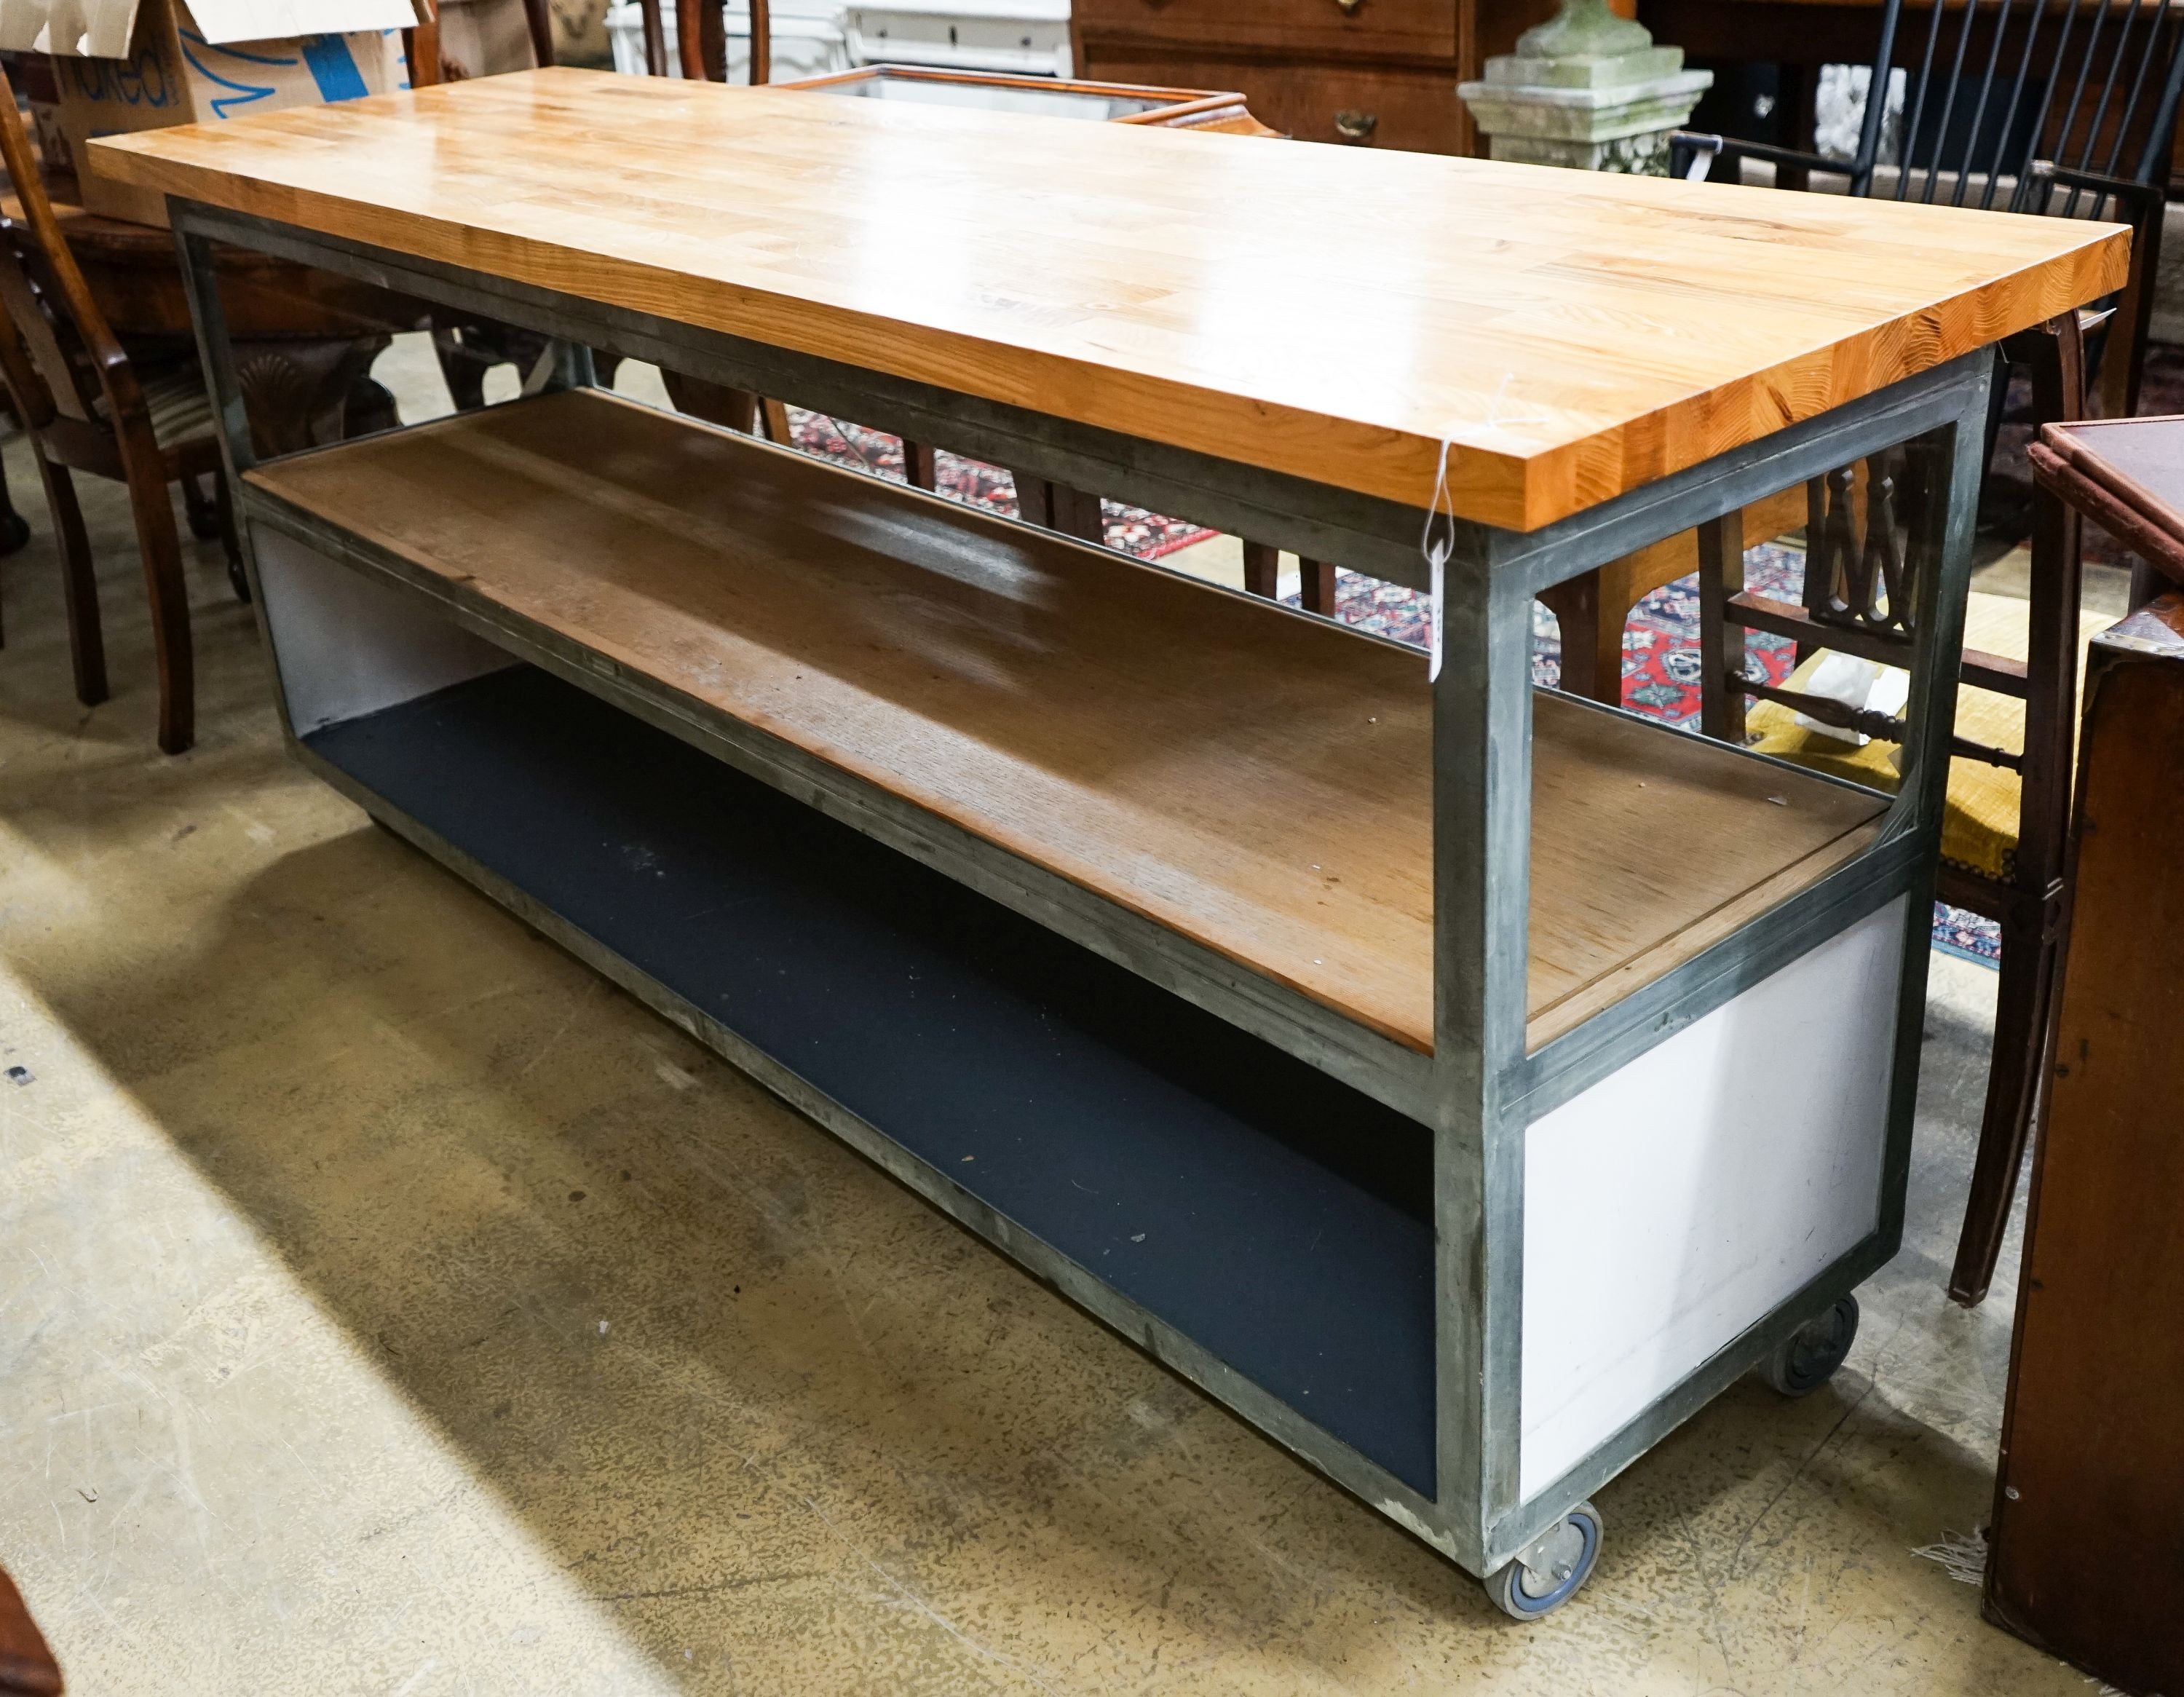 A glazed shop counter now as a kitchen island with removable wood worktop, length 212cm, depth 63cm, height 93cm